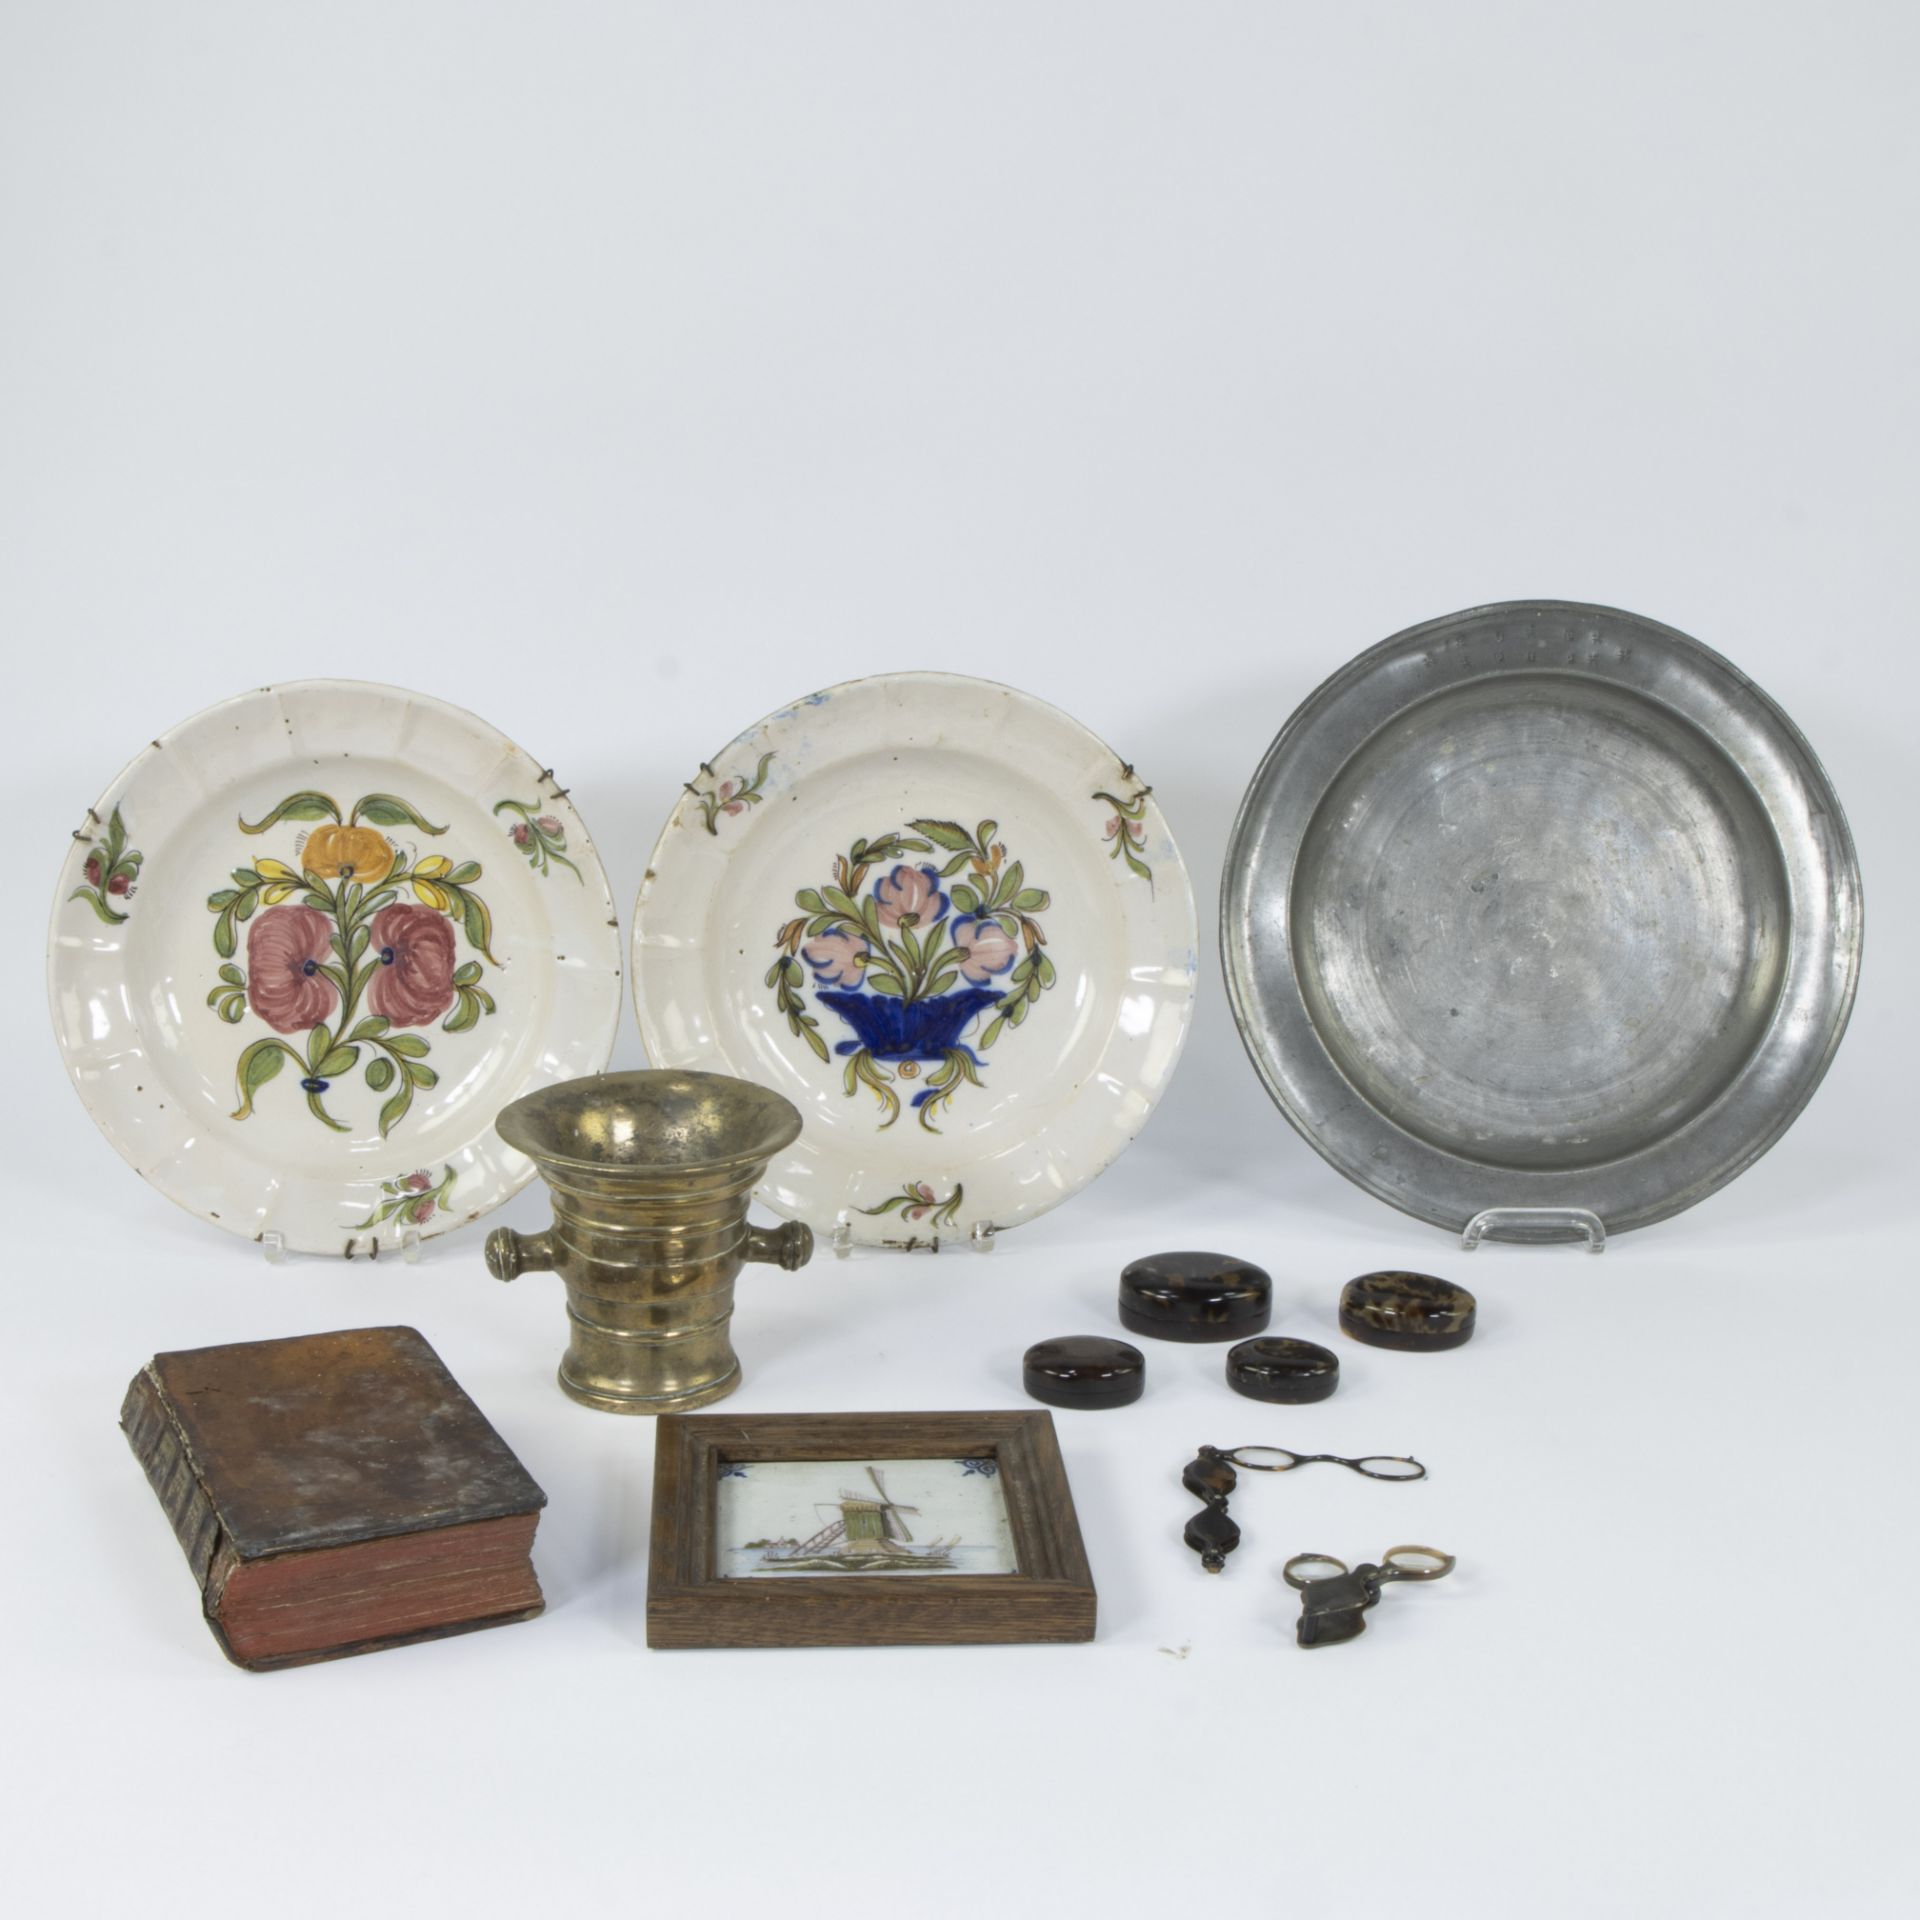 Collection of miscellaneous, 18th century French plates, pewter plate, mortar, boxes and lorgnettes